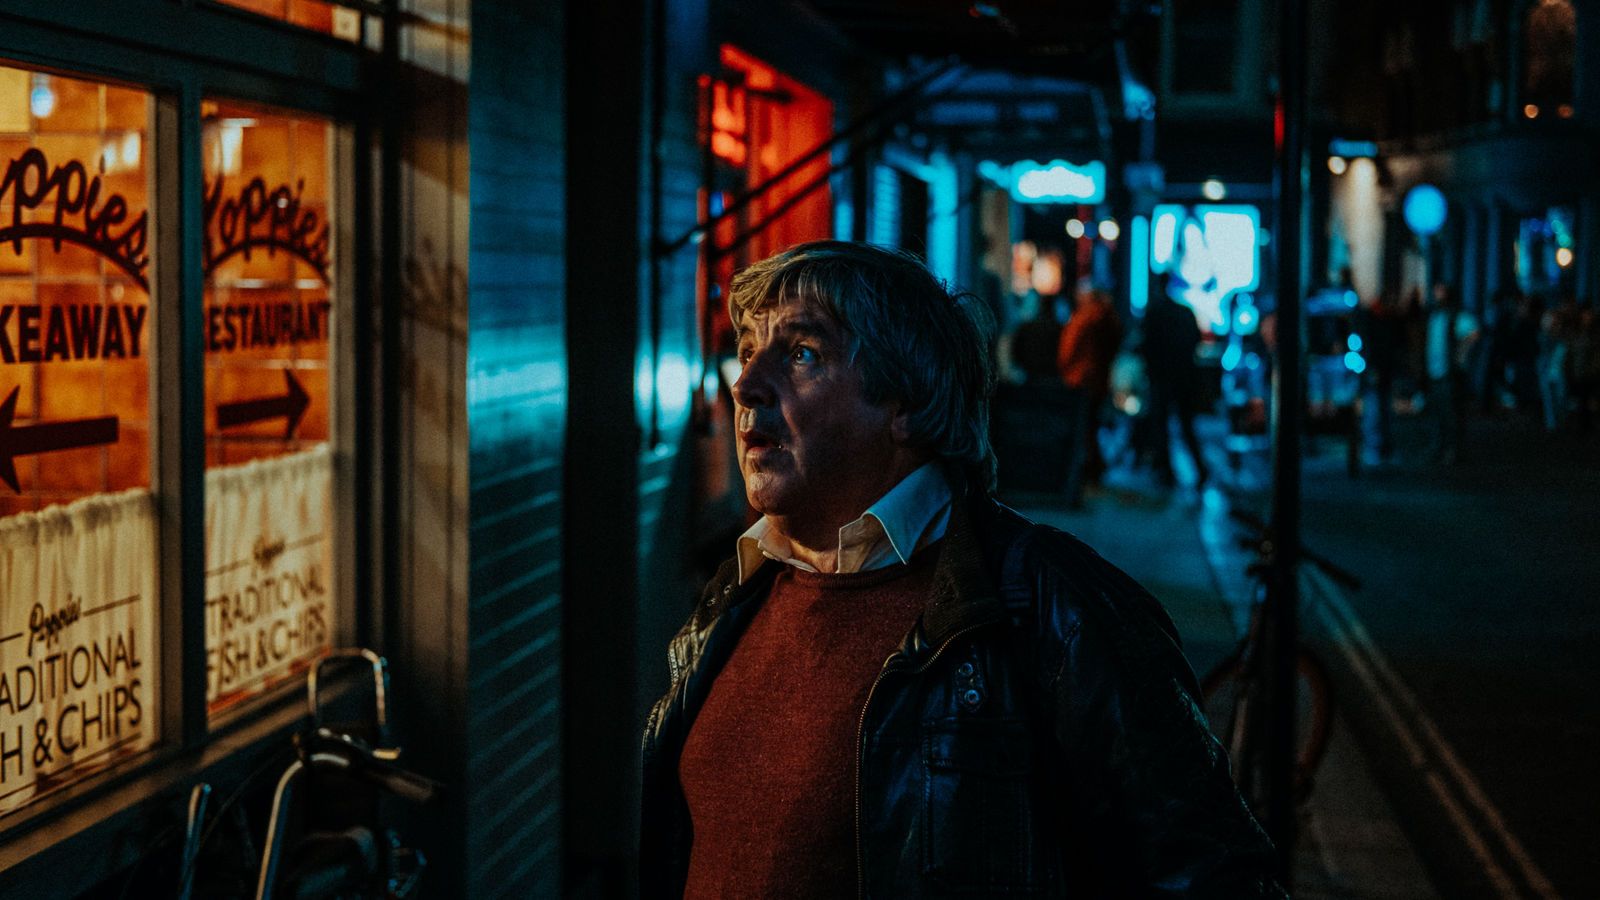 Street Photography from the Unsplash Awards image 3